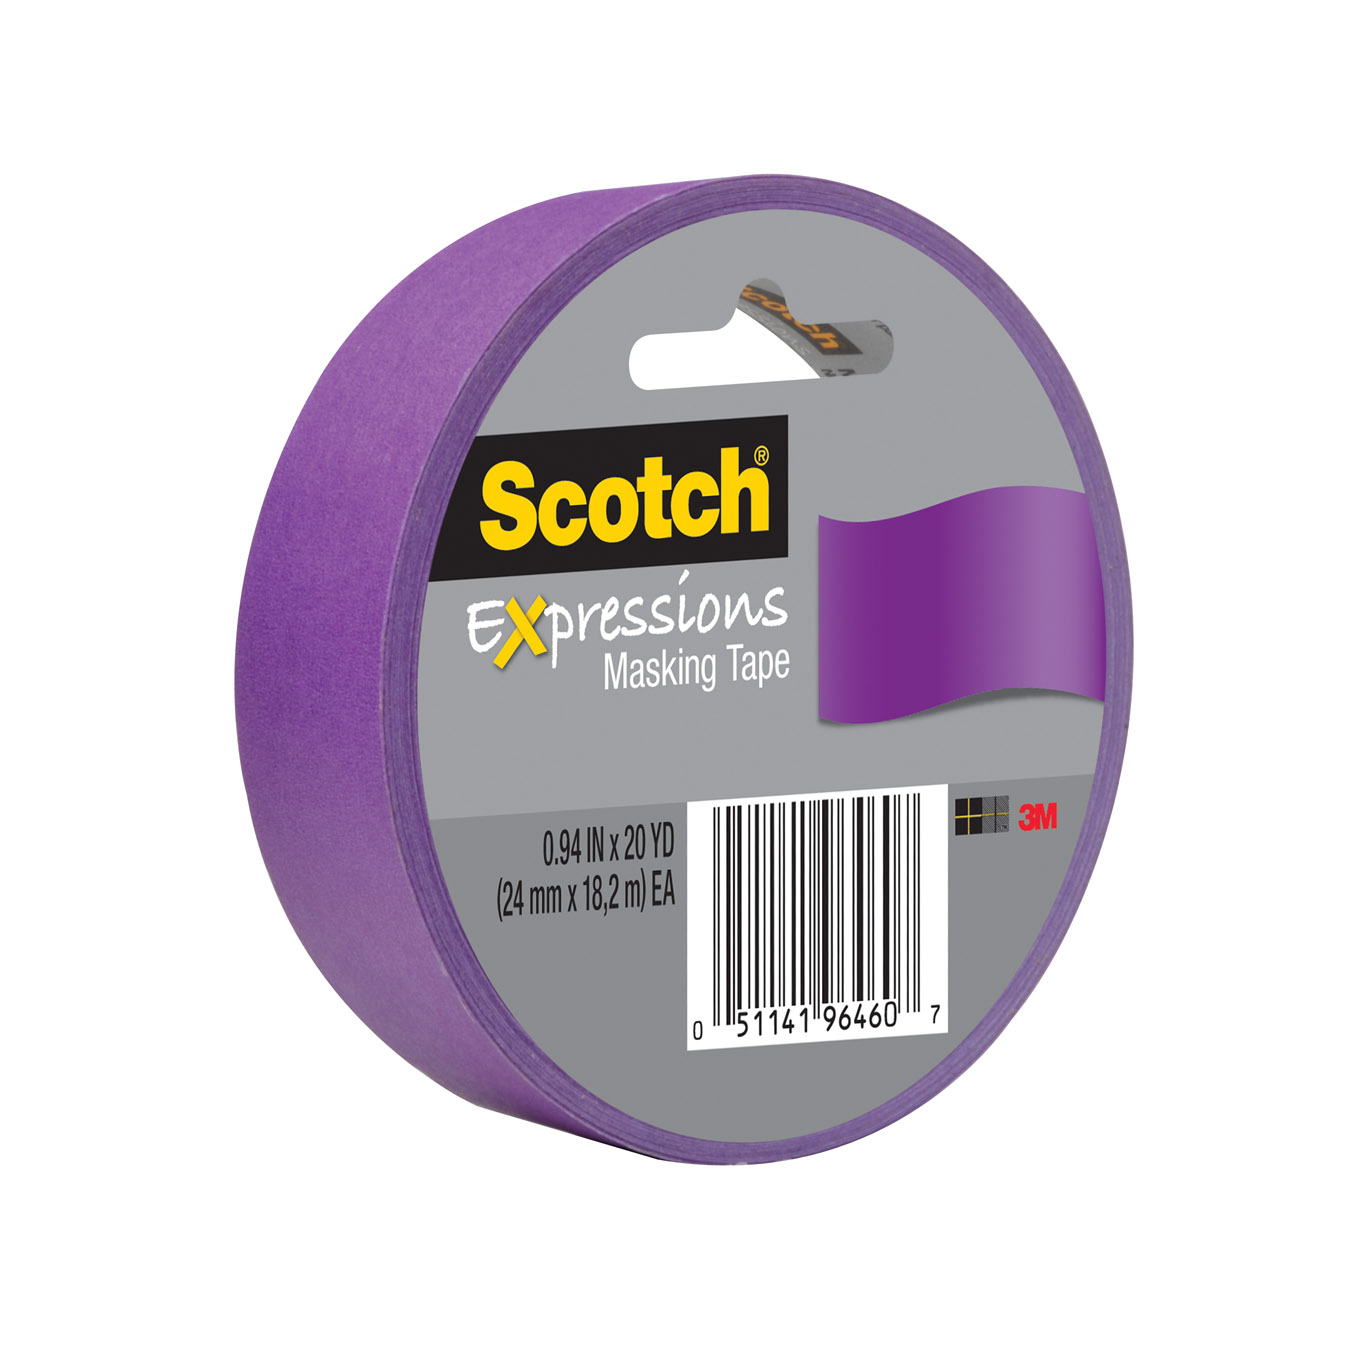 00051141964607 Scotch® Expressions Masking Tape, 3437-PUR-ESF, Purple  Aircraft products na 9390637